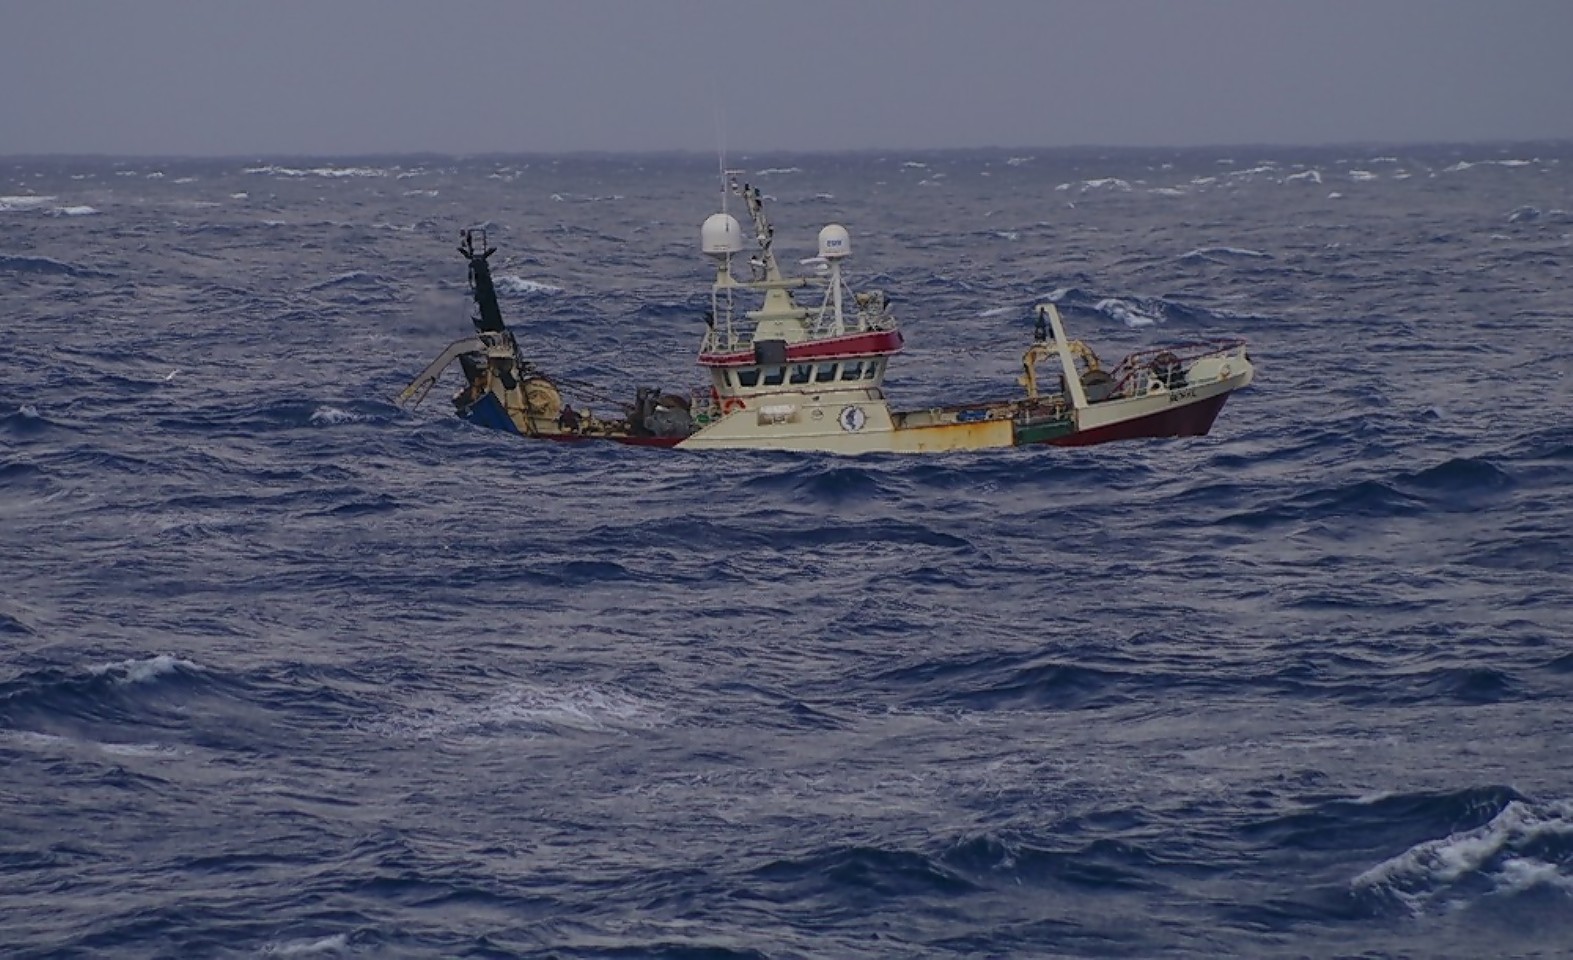 The BF 440 Beryl boat involved in the accident